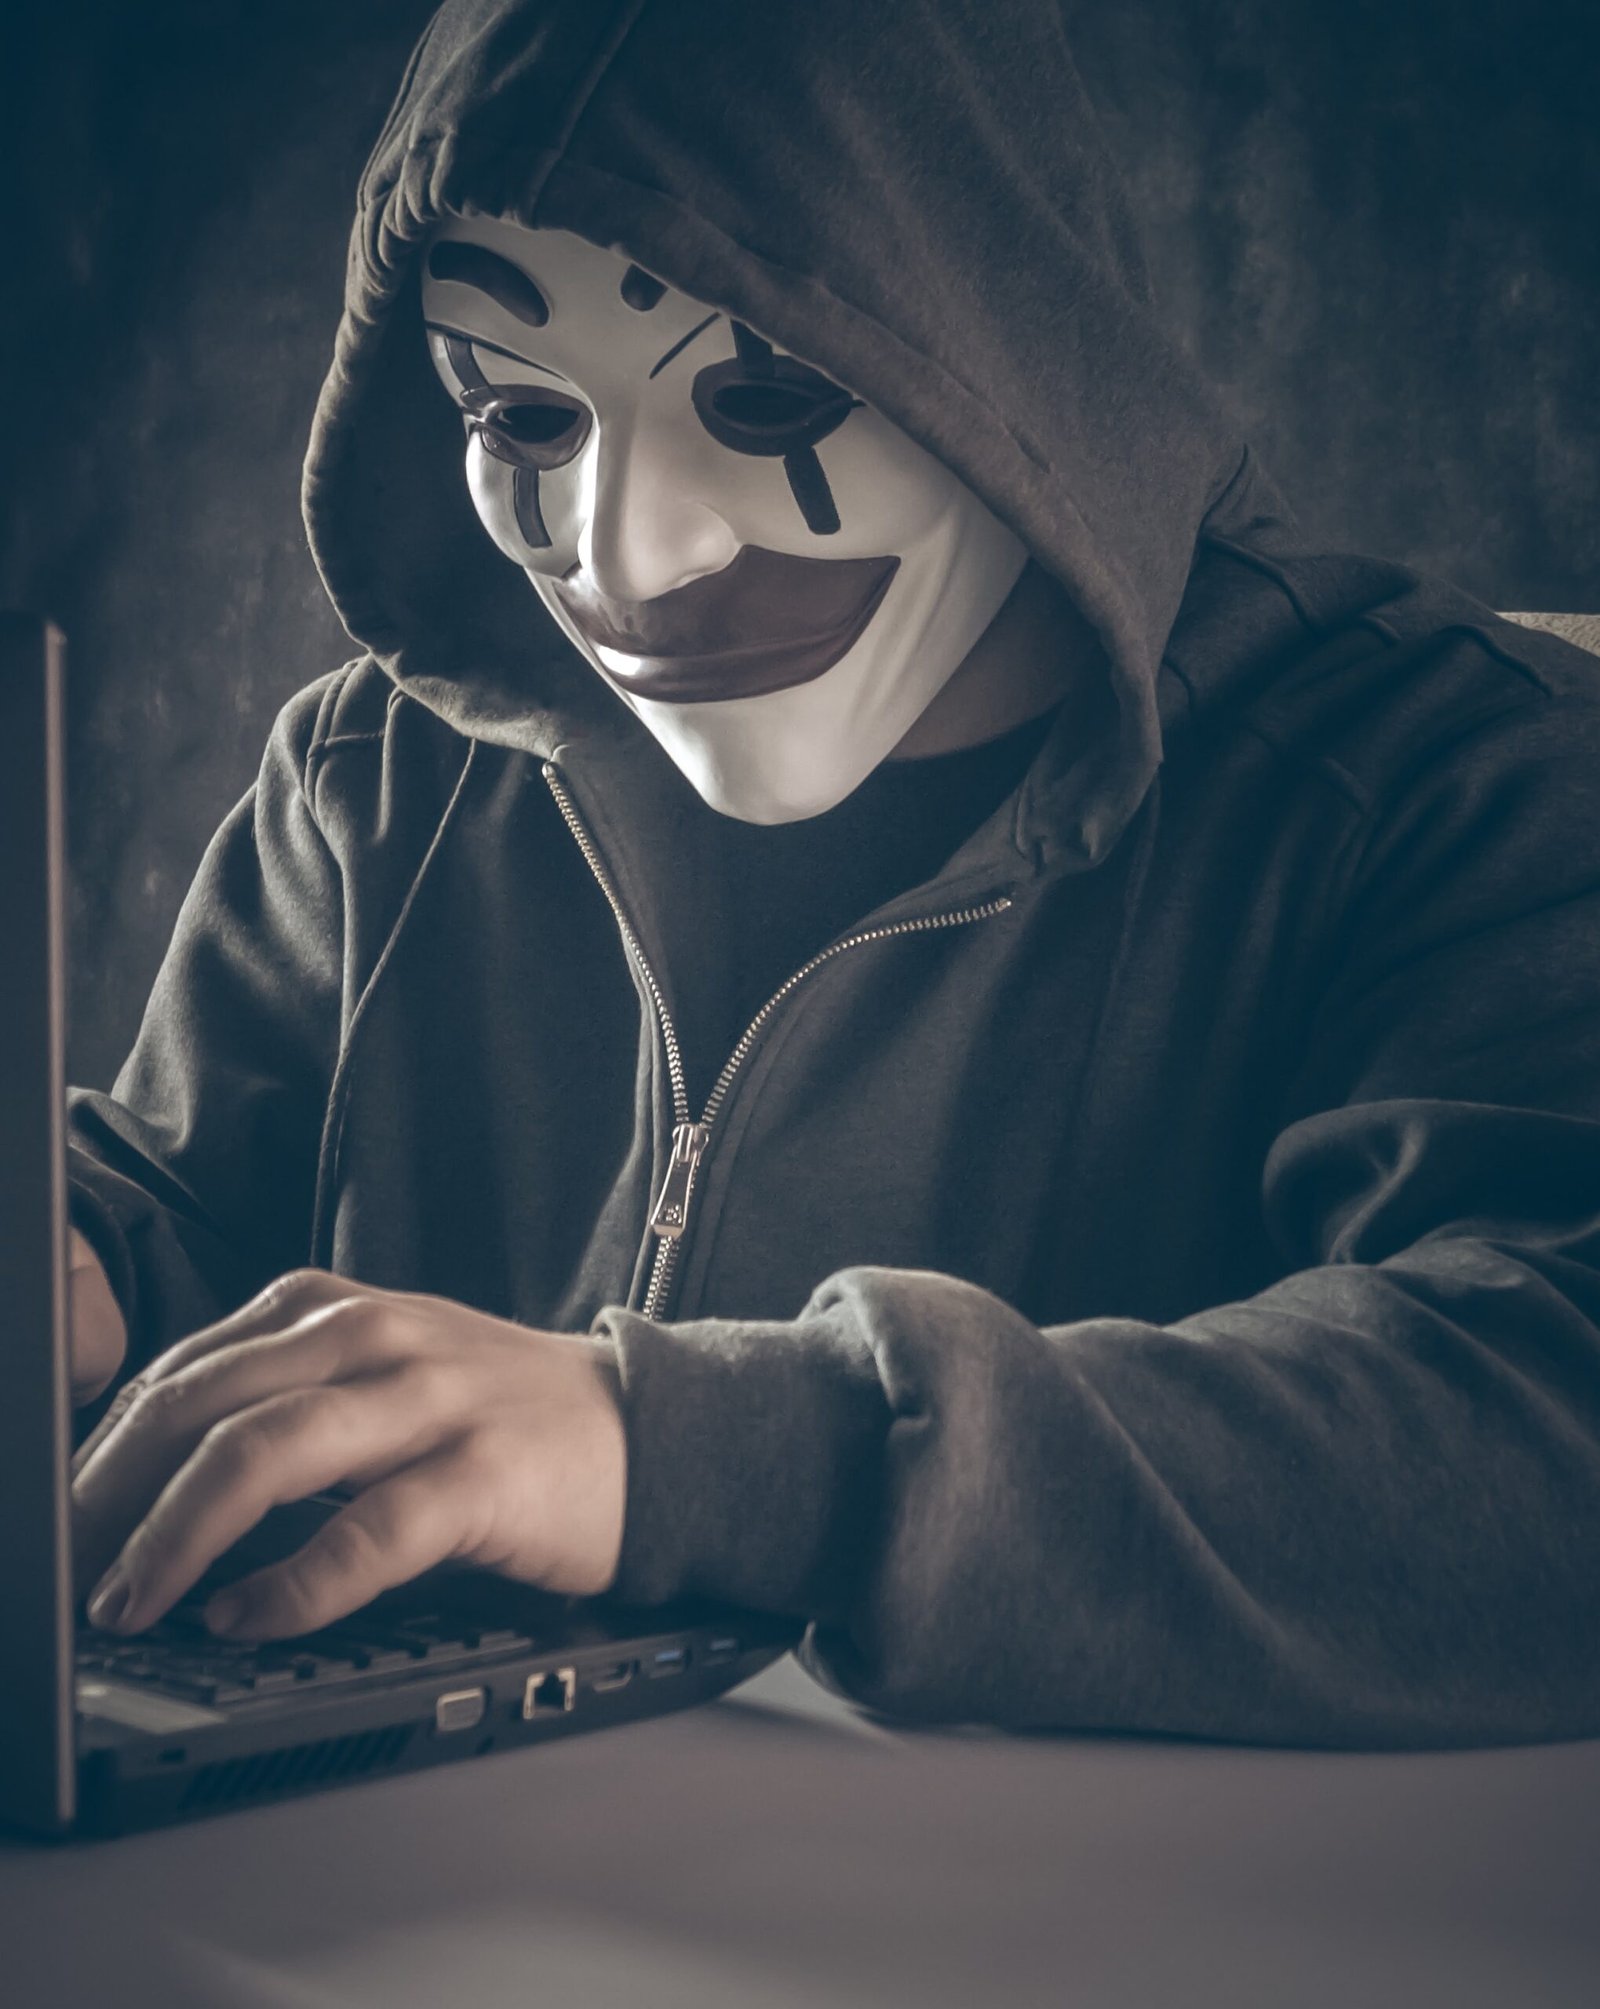 online fraud and scams